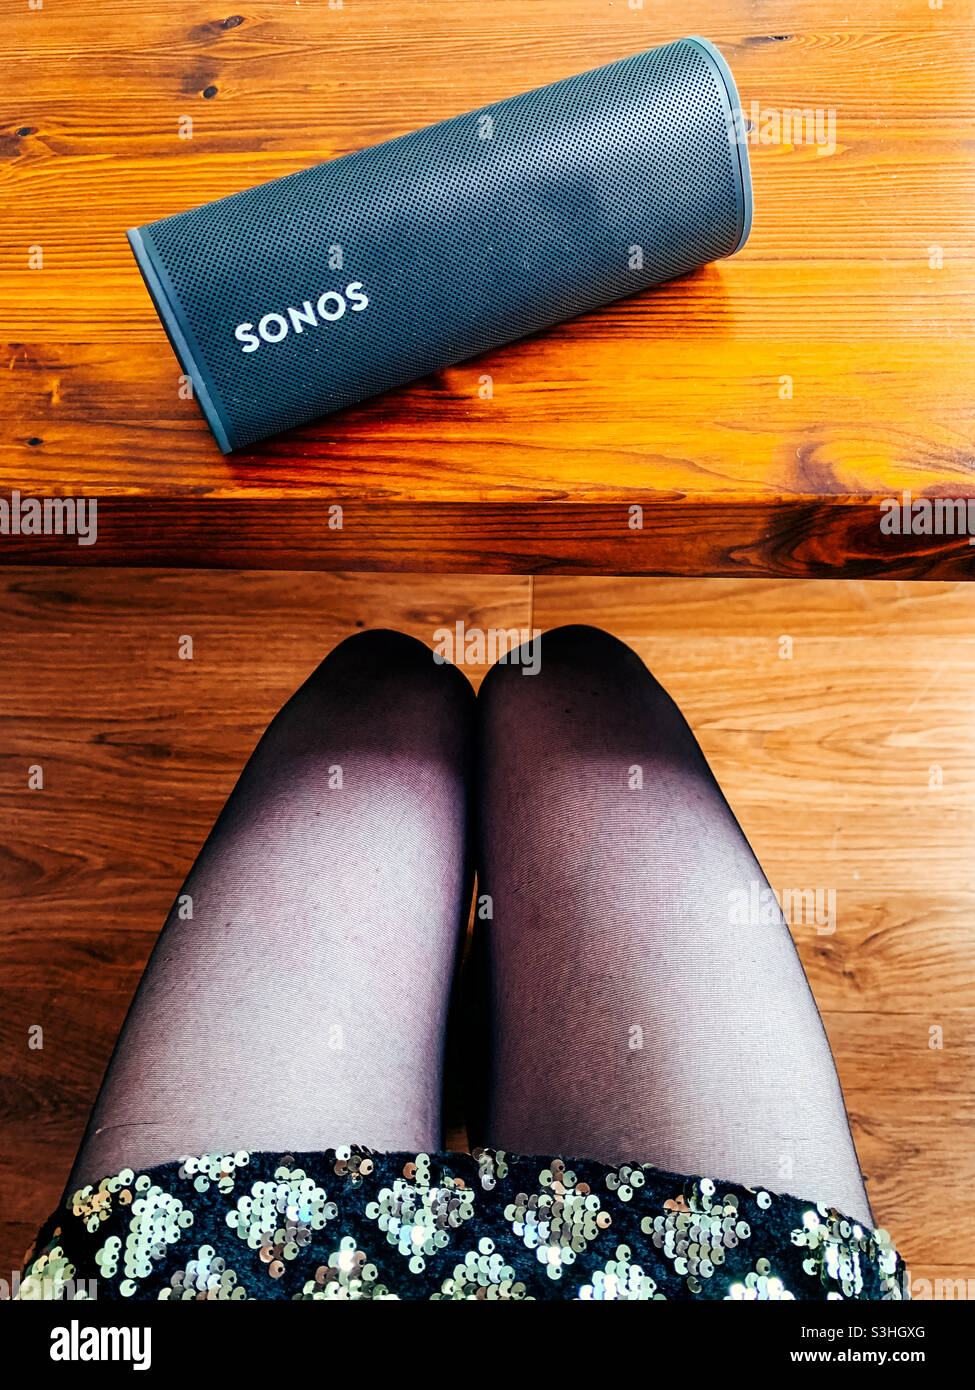 Sonos Roam portable speaker on a wooden table next to a woman wearing a sequin dress Stock Photo